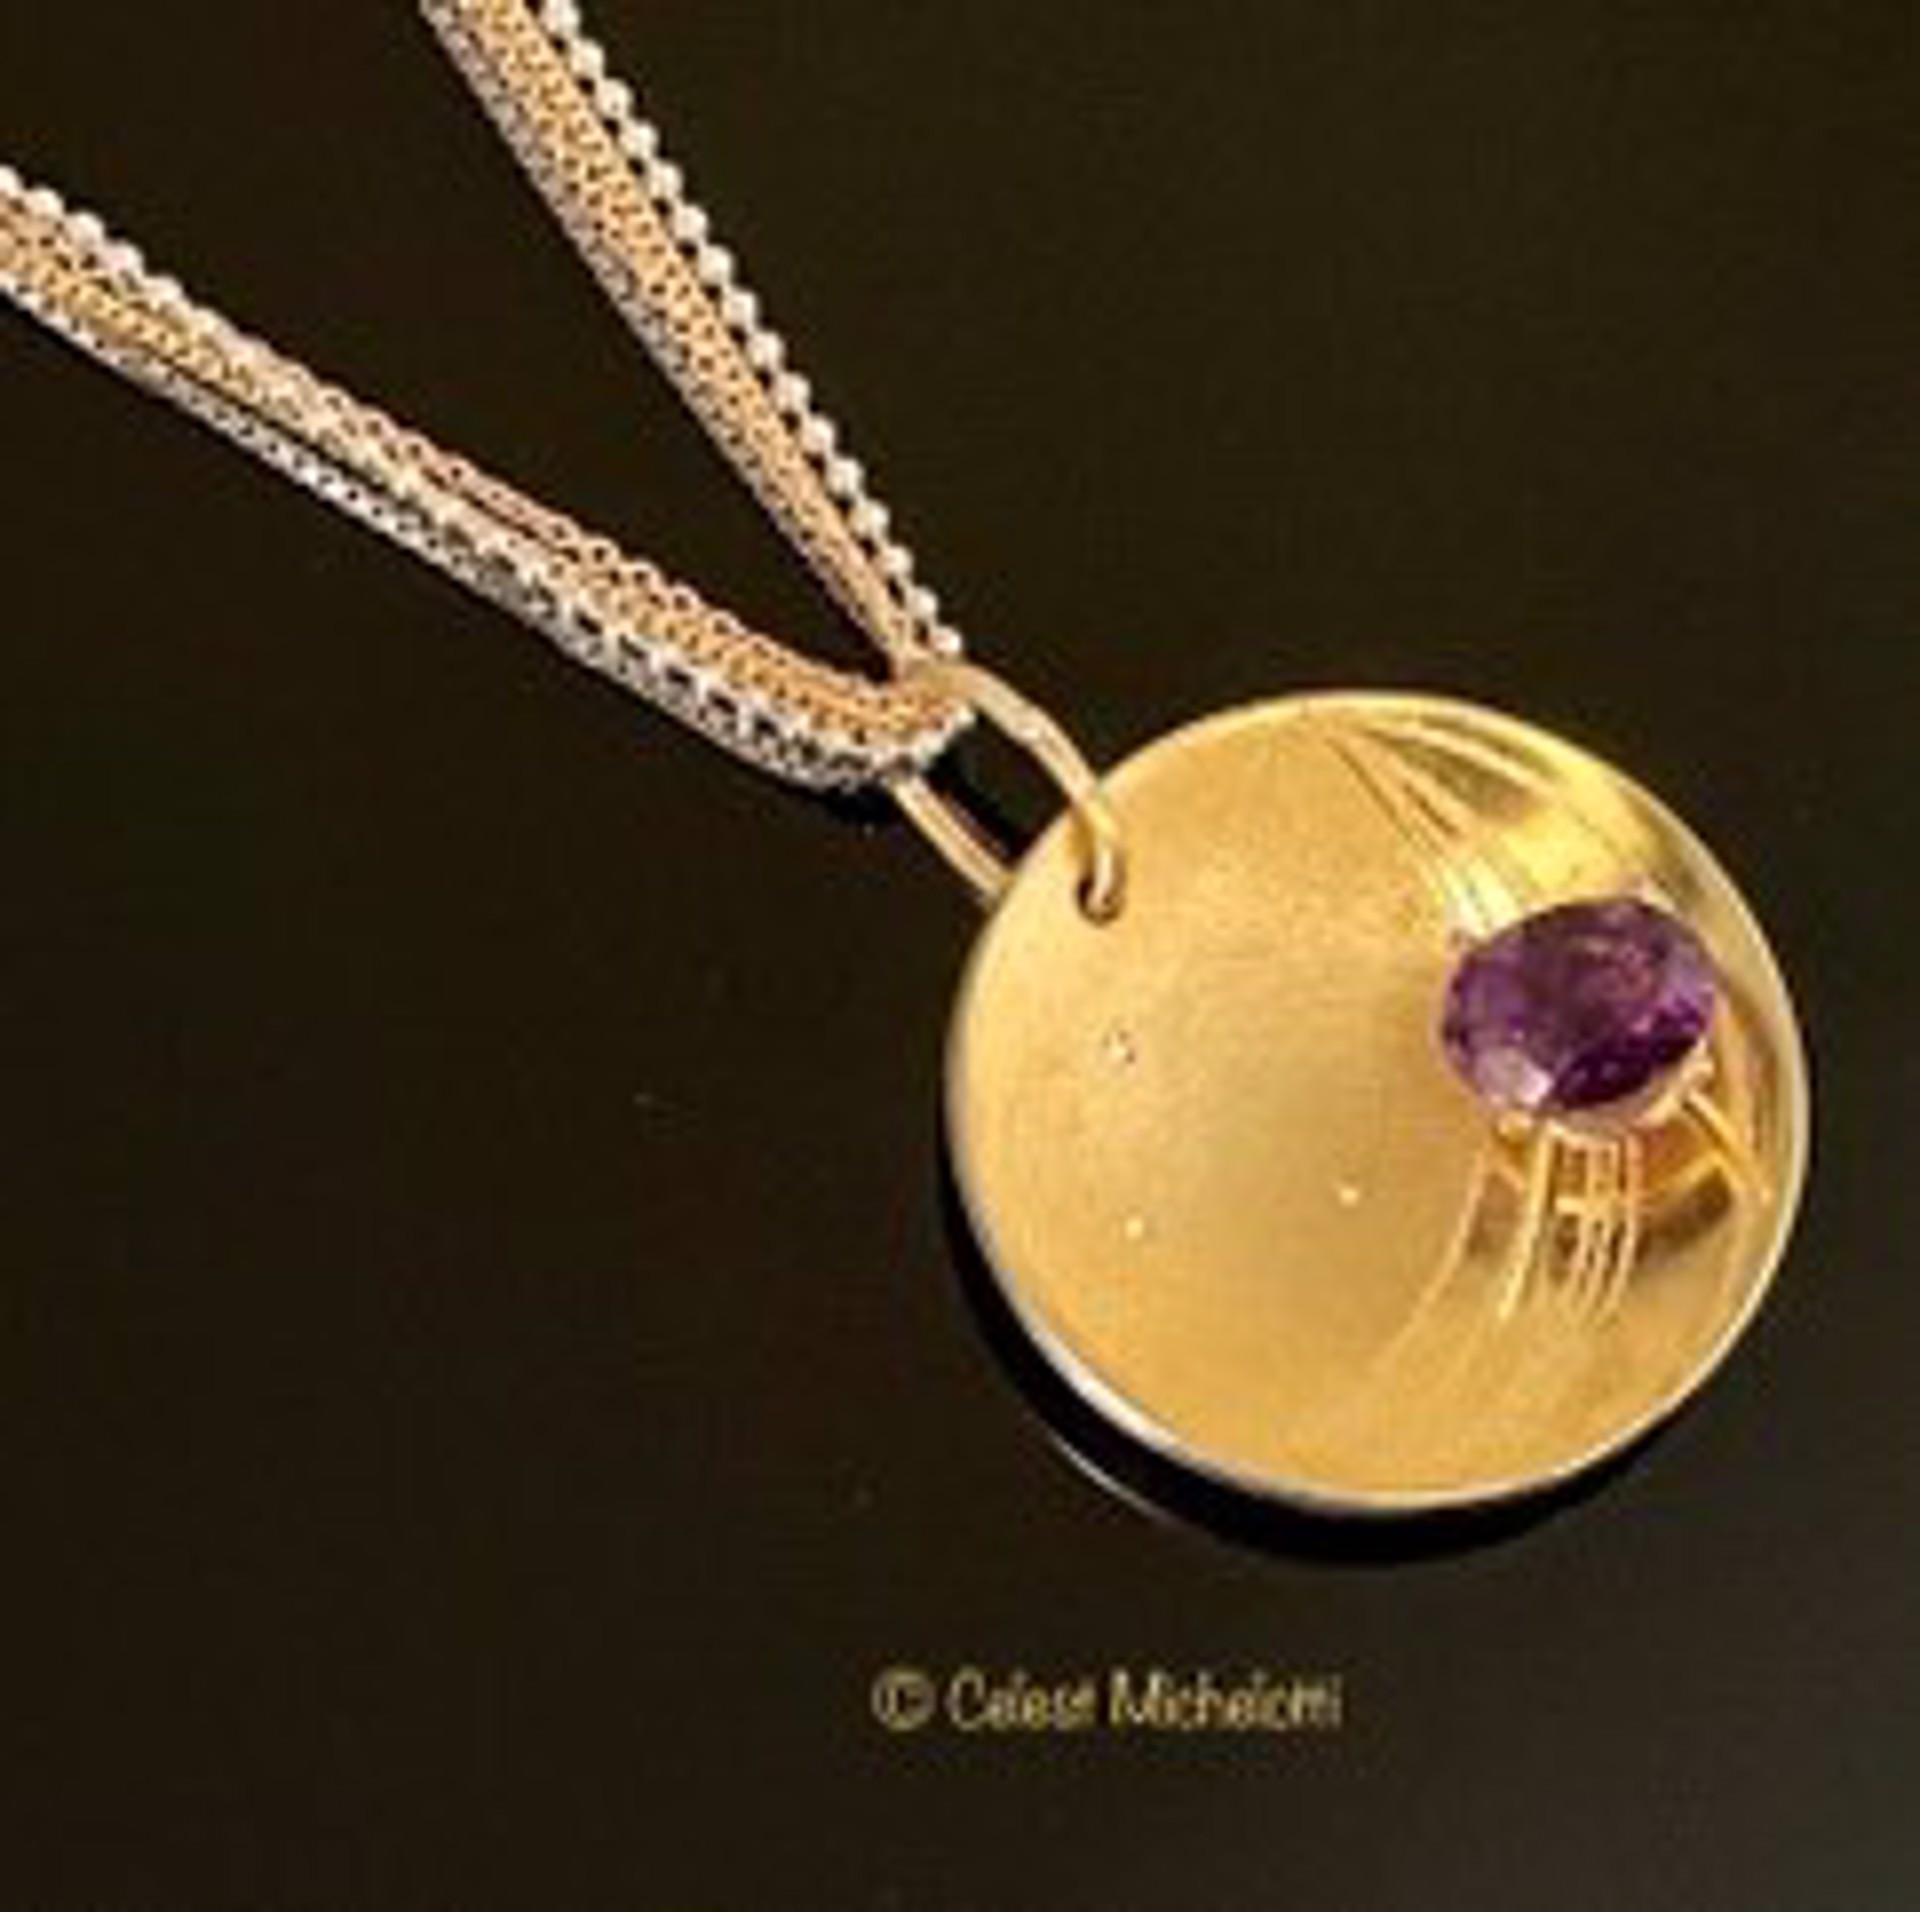 Starry Nights Necklace, Amethyst with 3 Stars by Celest Michelotti